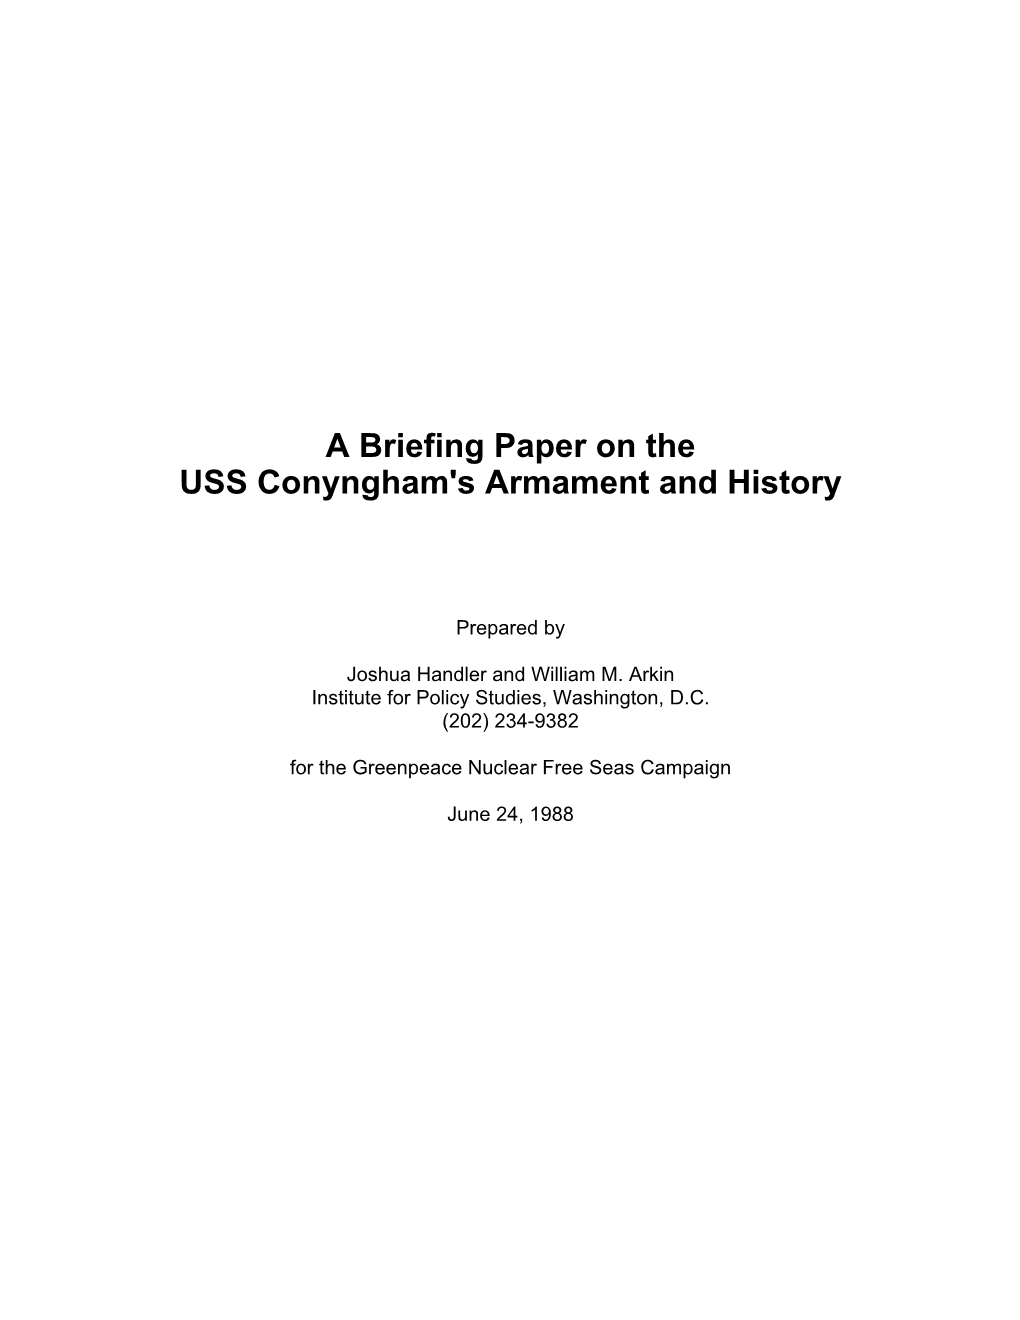 A Briefing Paper on the USS Conyngham's Armament and History